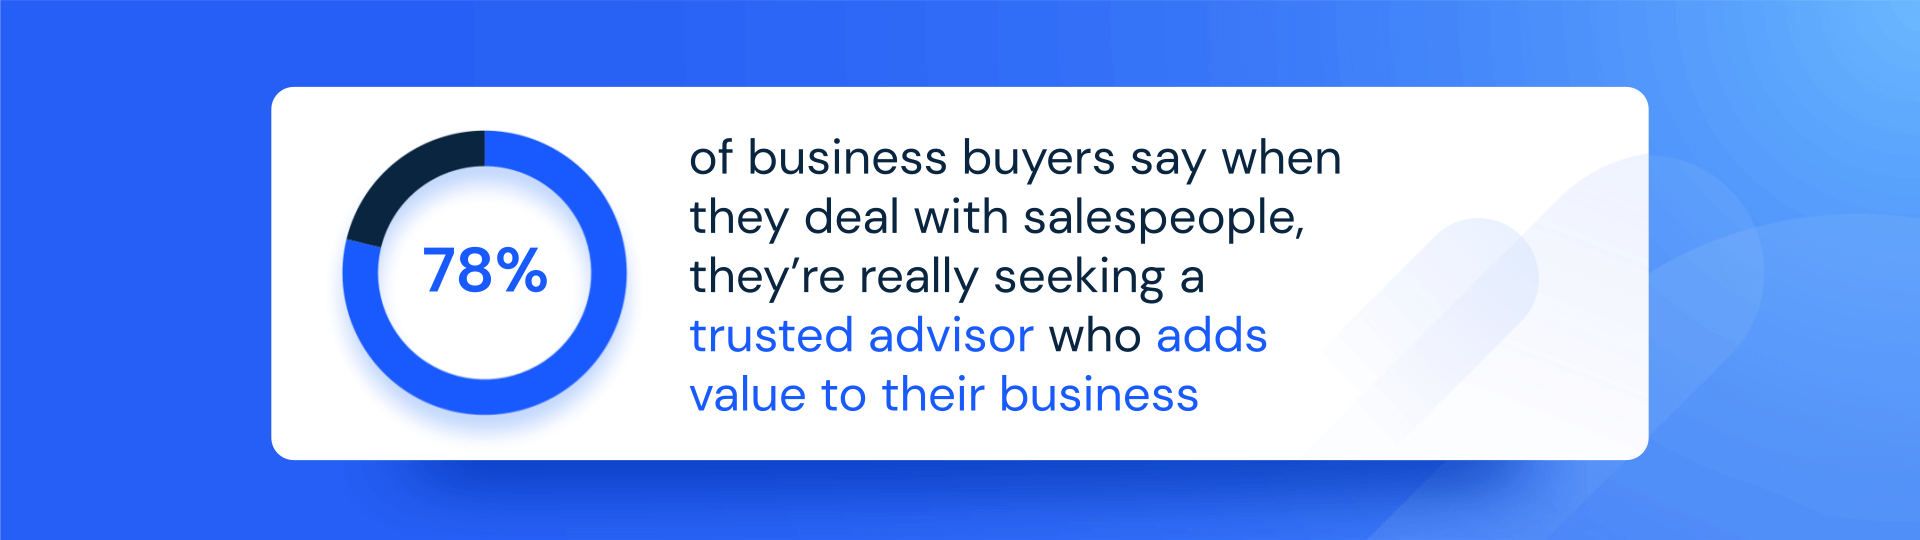 Research into the relationship between business buyers and salespeople